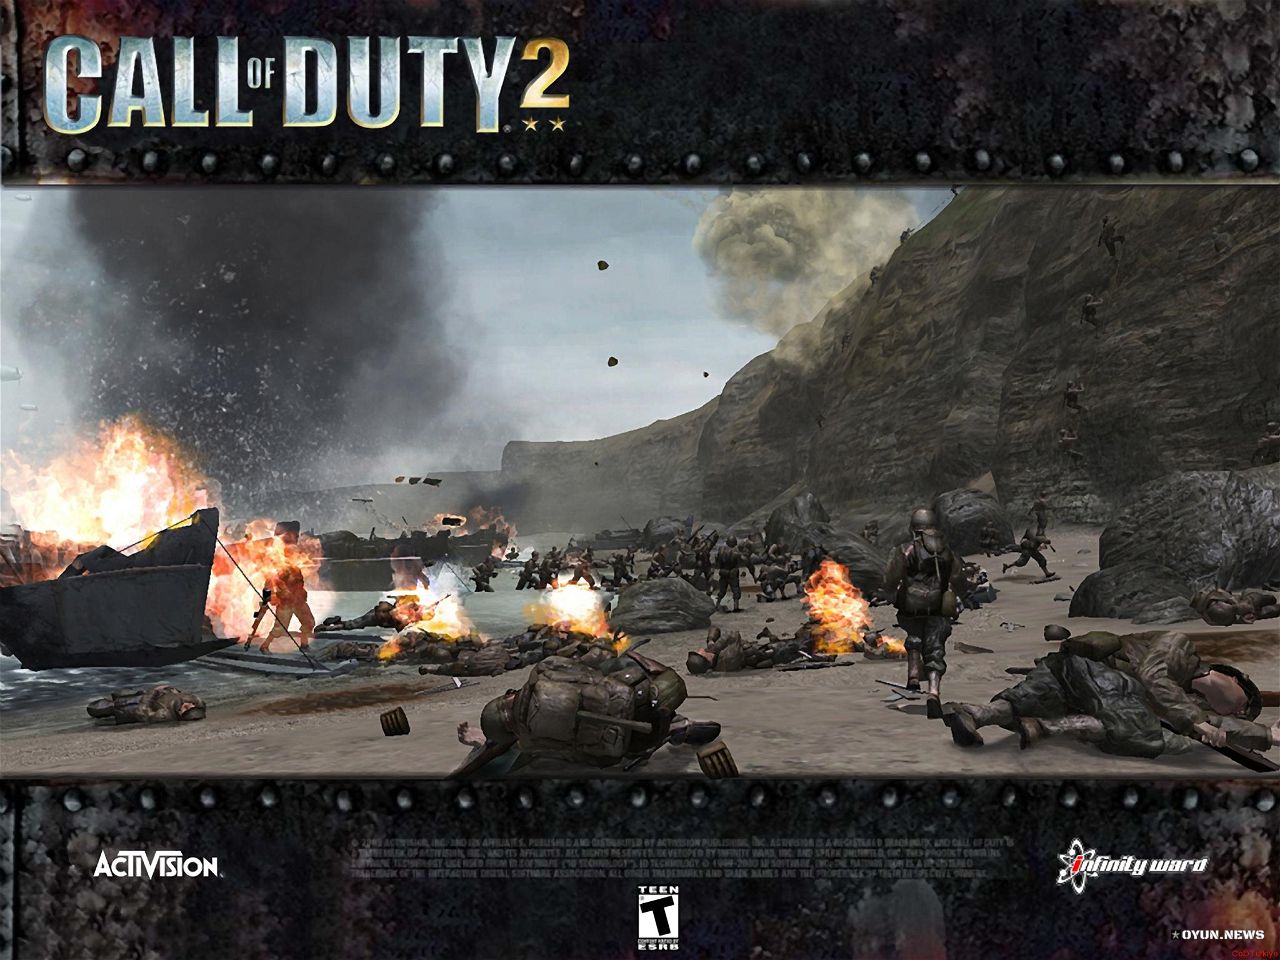 Call Of Duty 2 Wallpaper In Special Frame 8 2048x1536